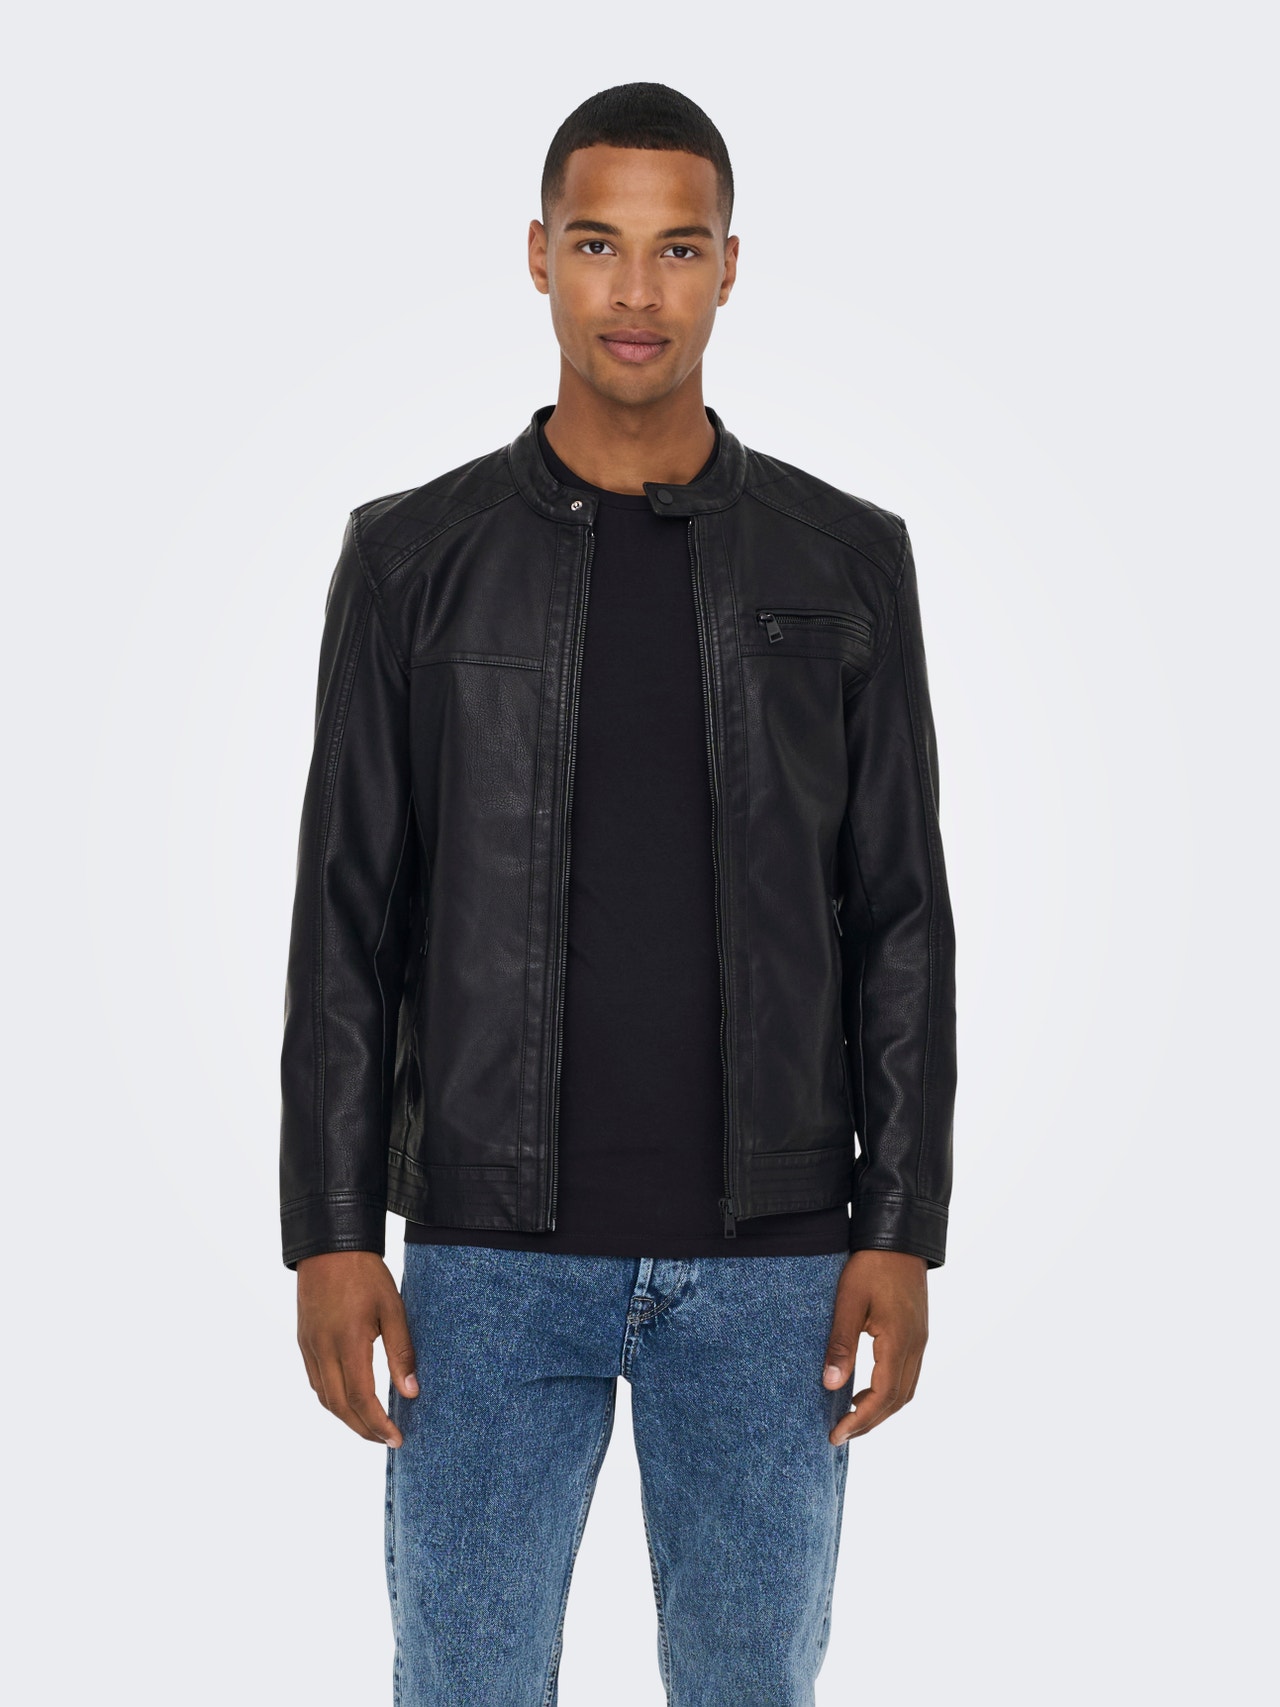 ONLY & SONS Jacke -Black - 22011975